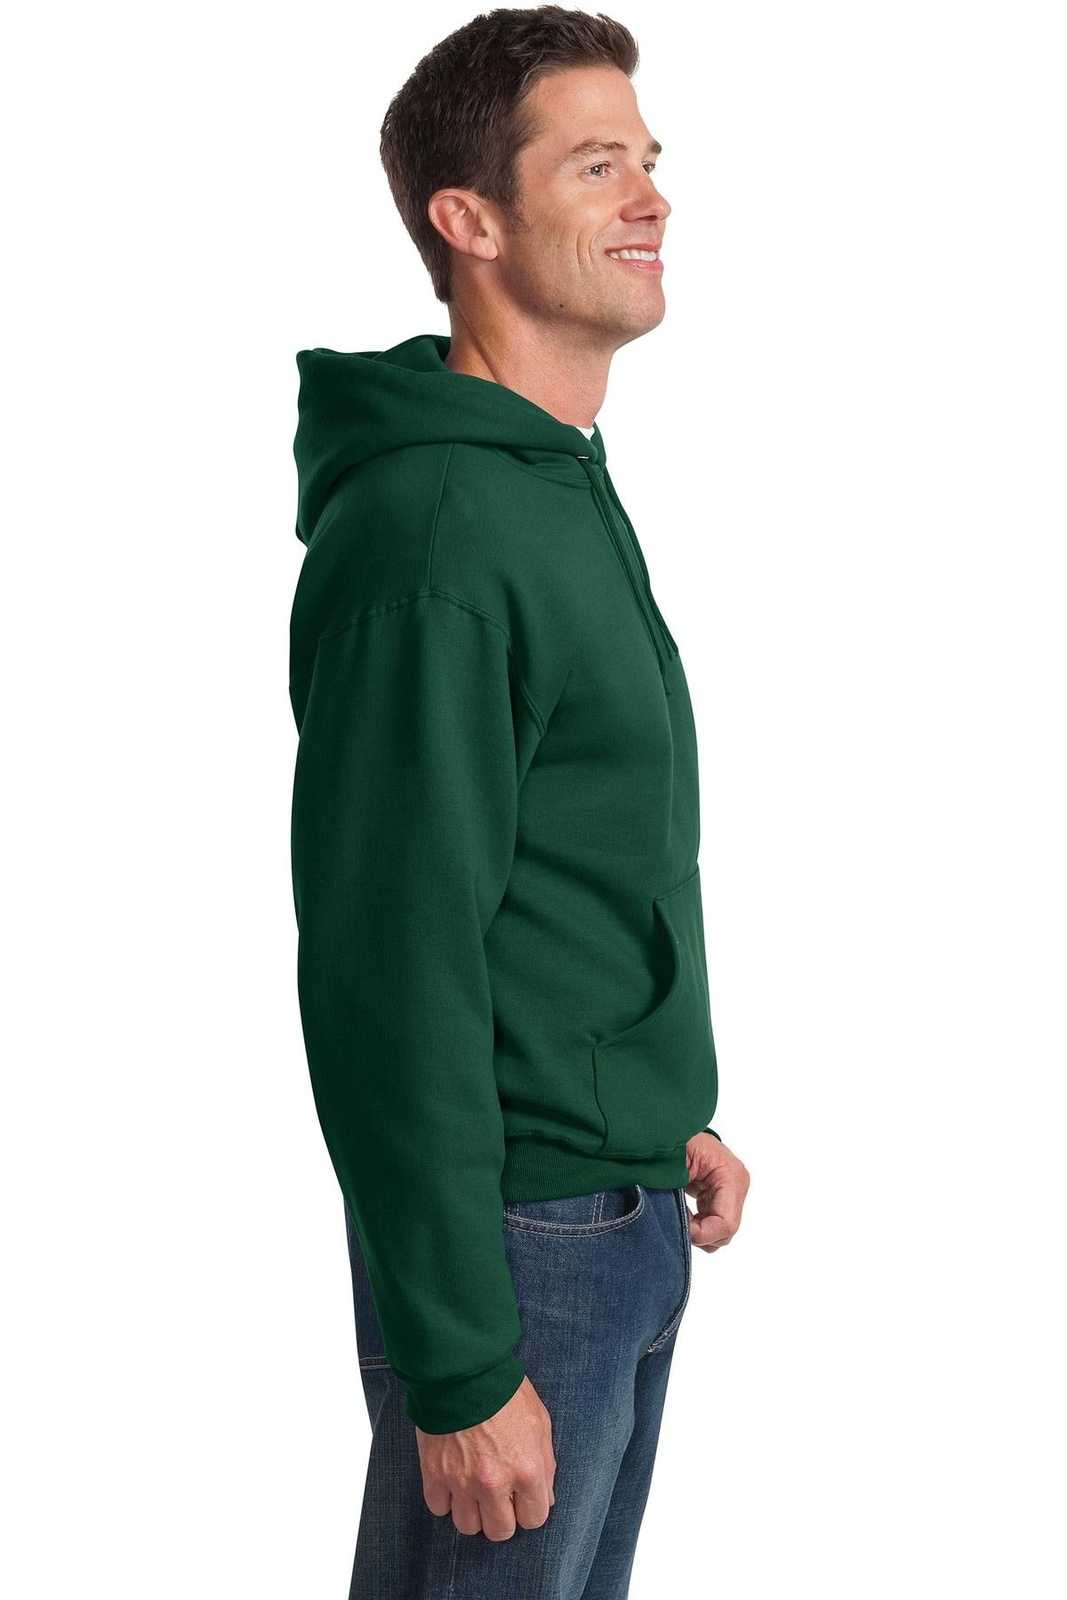 Jerzees 996MR NuBlend Pullover Hooded Sweatshirt - Forest Green - HIT a Double